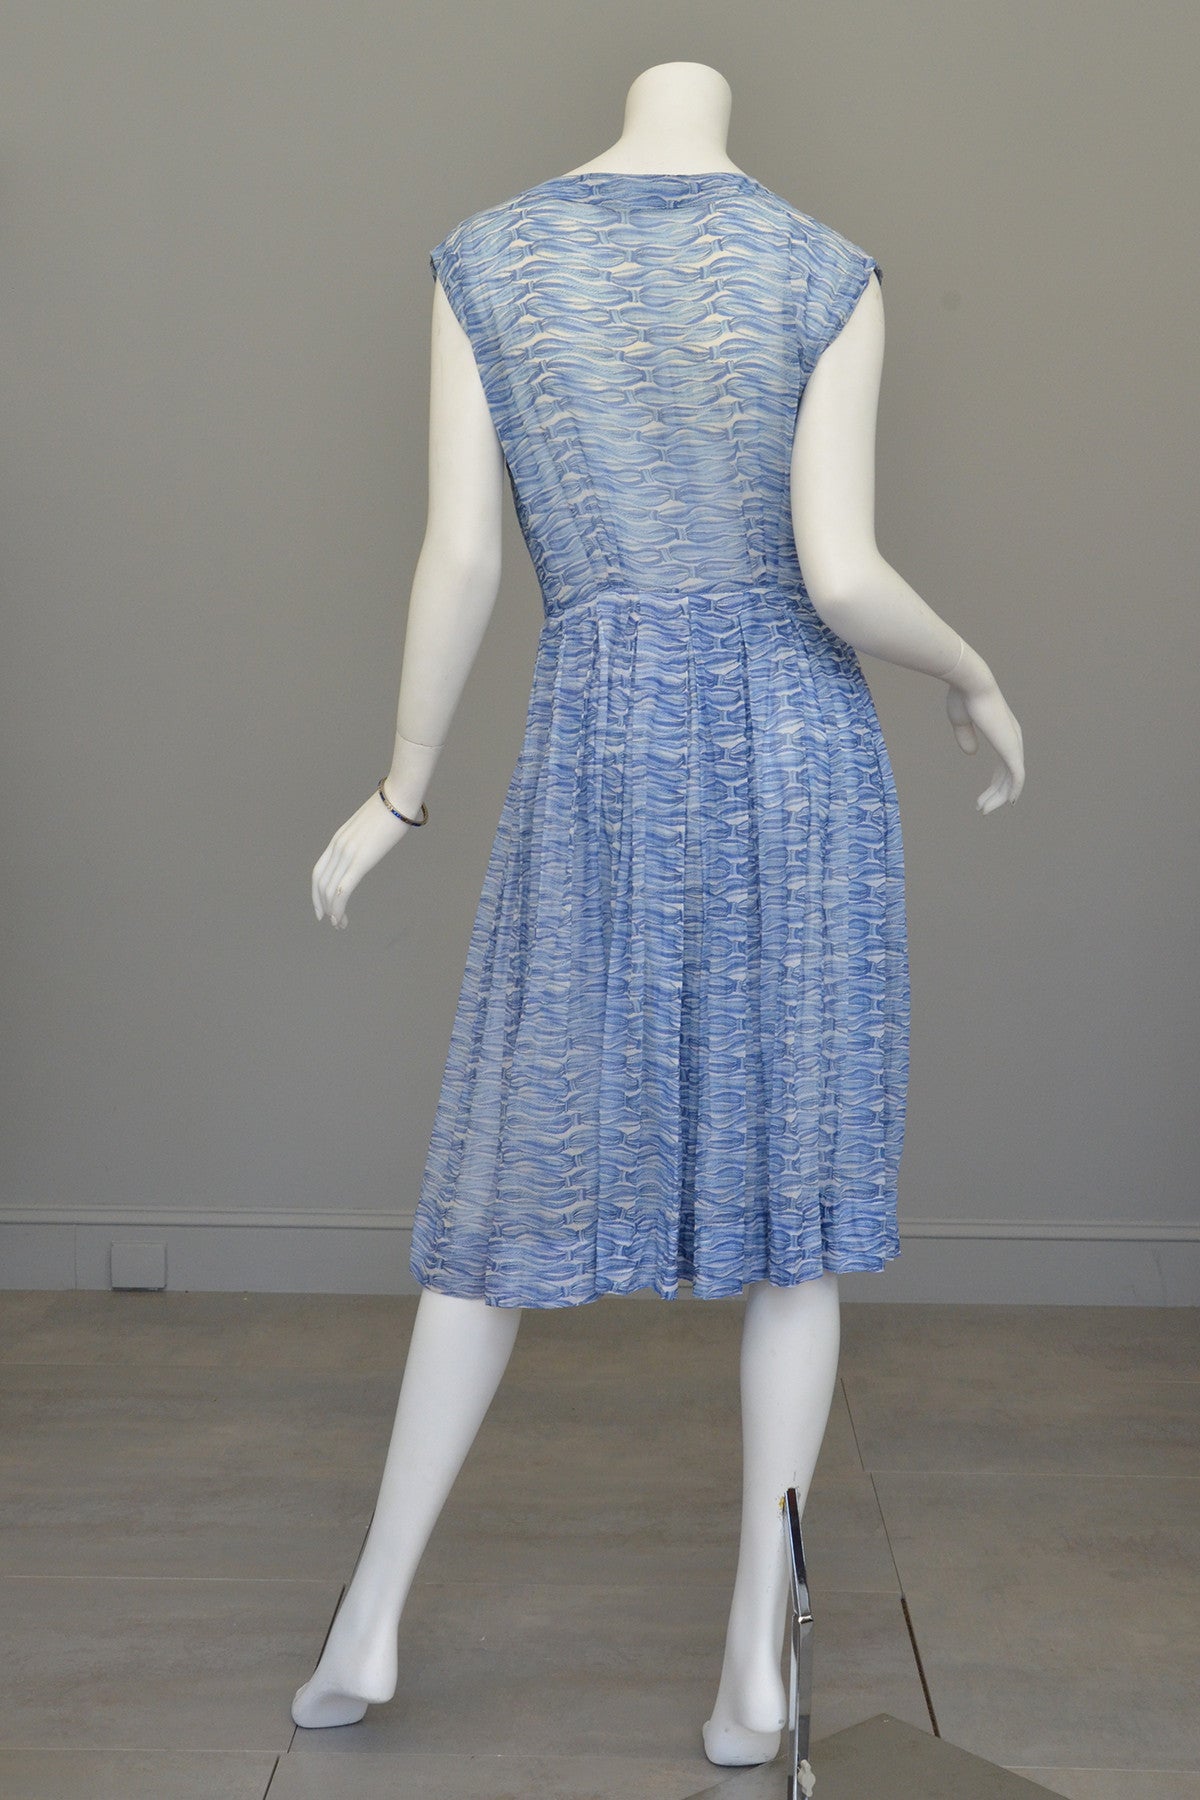 1950s Oceanic Blue Smocked Sundress with Crystal Buttons